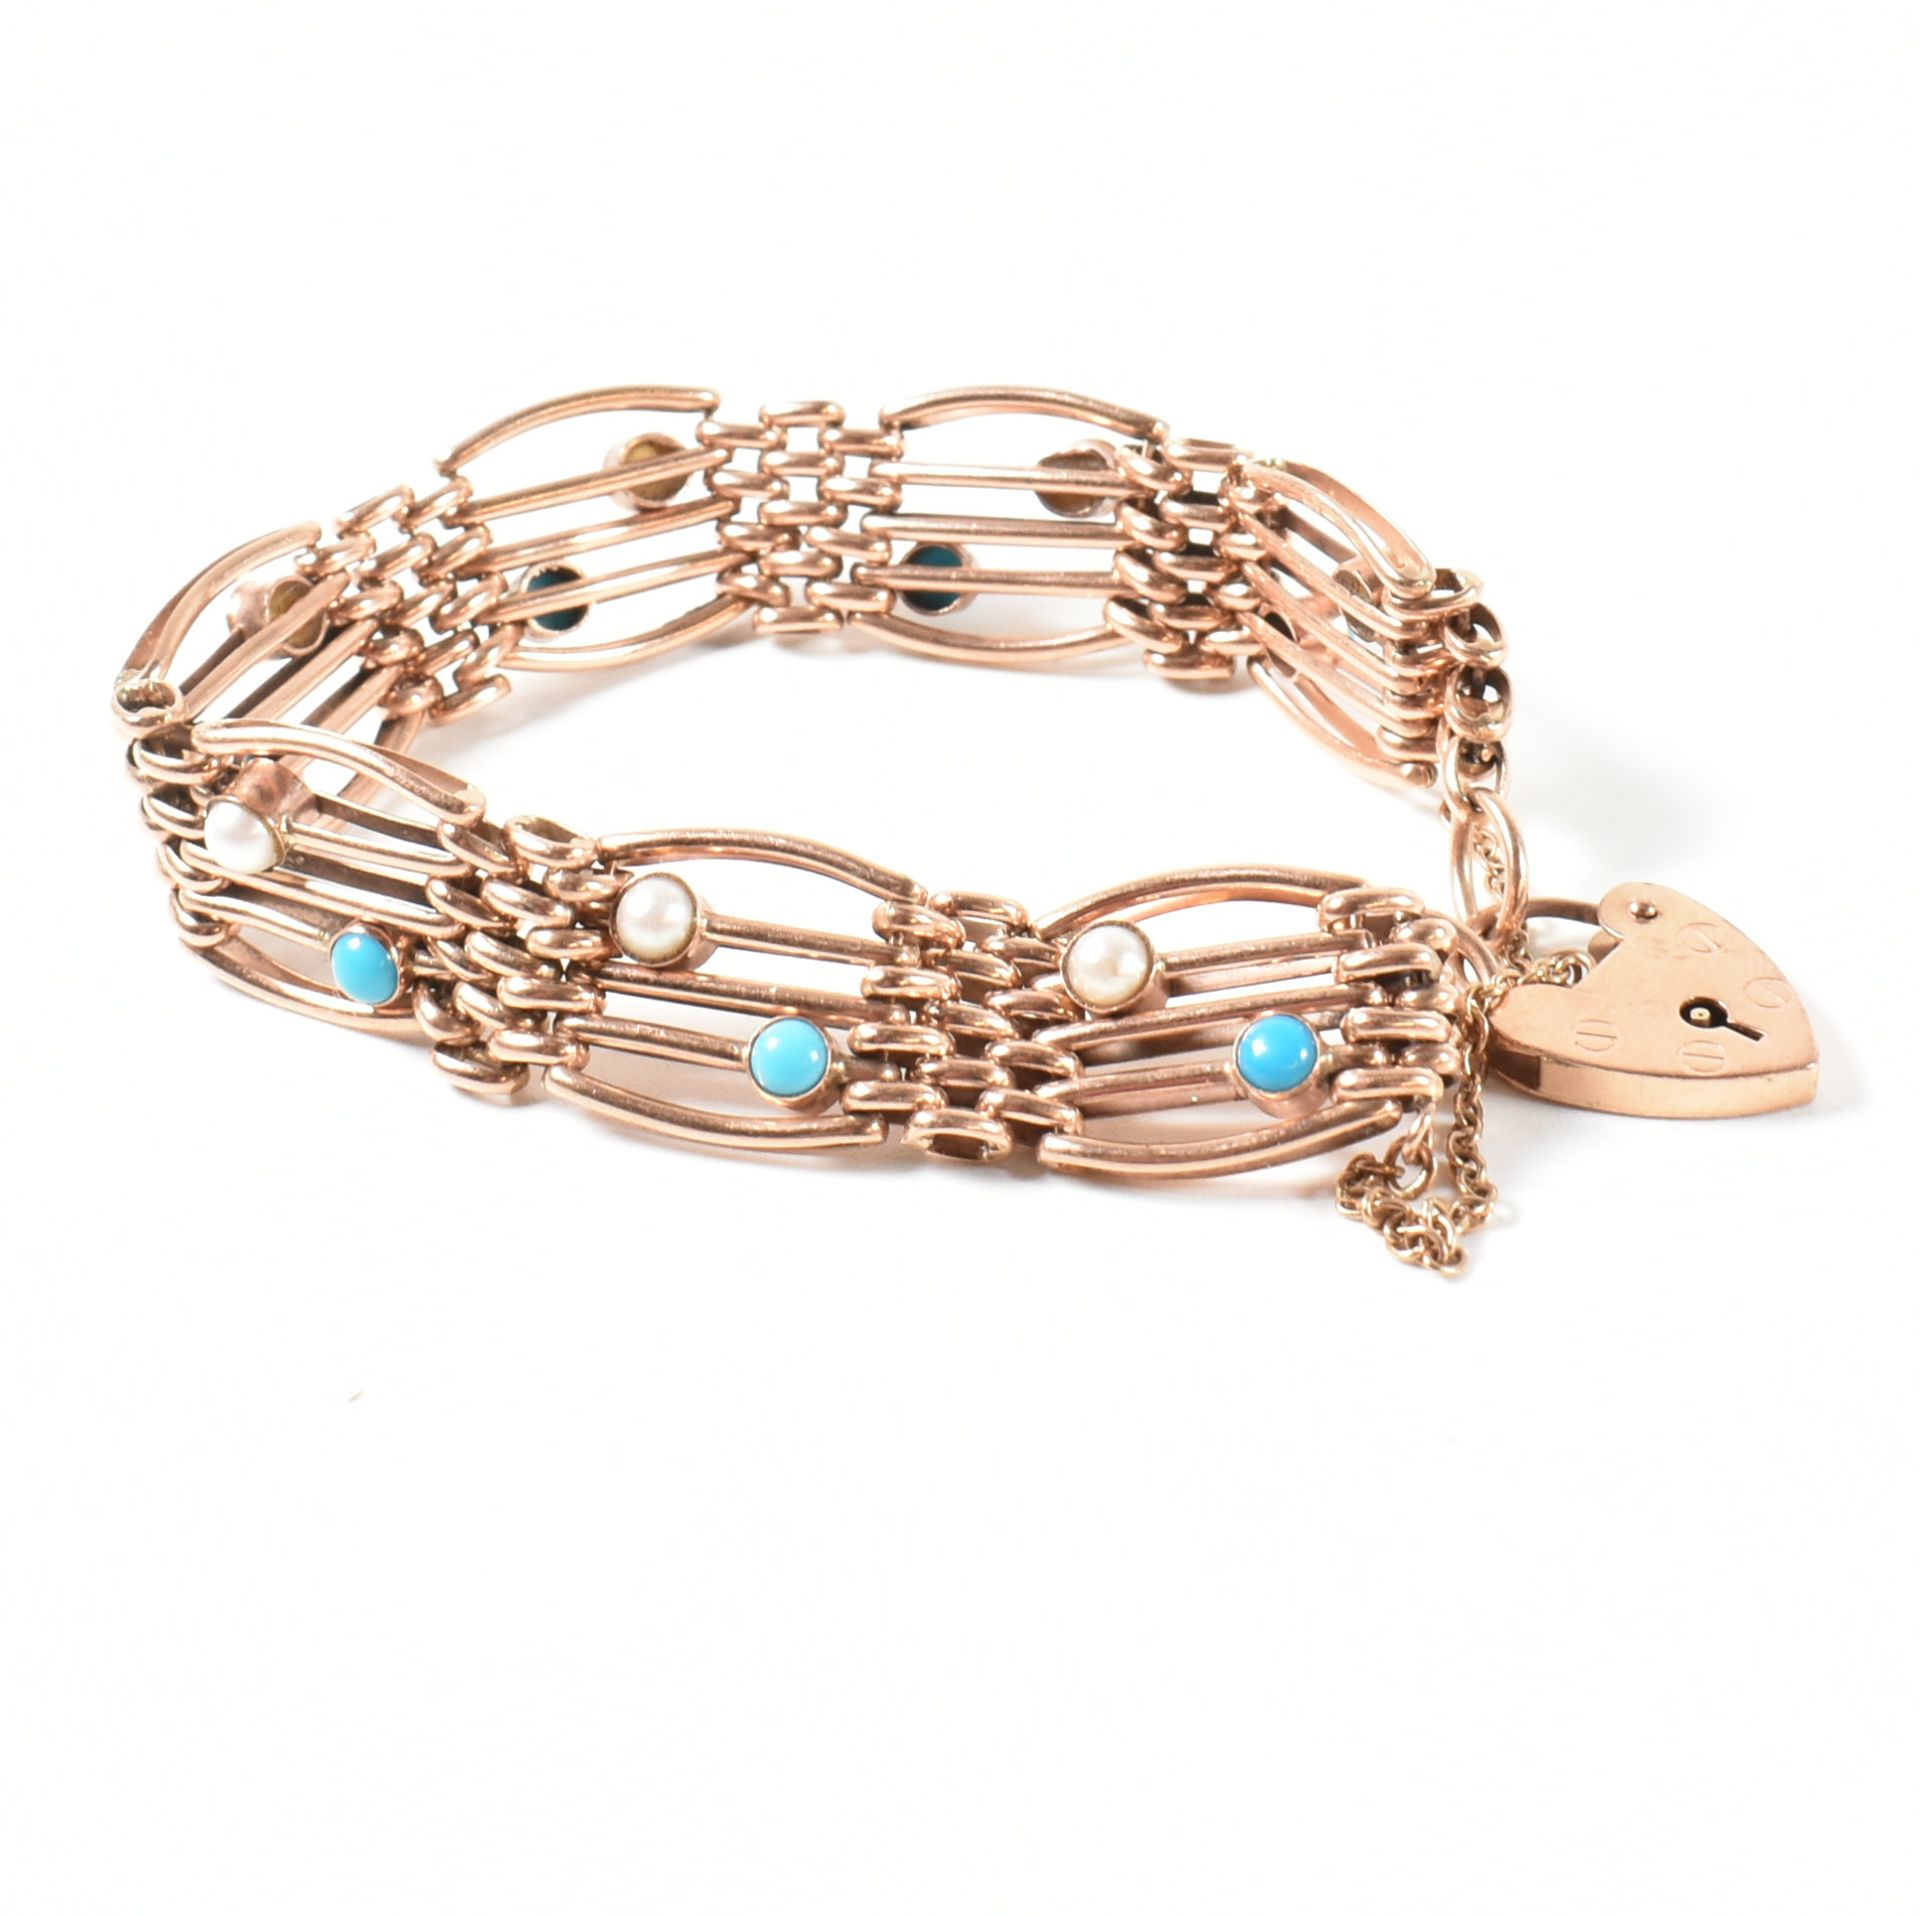 HALLMARKED 9CT ROSE GOLD PEARL & TURQUOISE GATE LINK BRACELET - Image 9 of 9